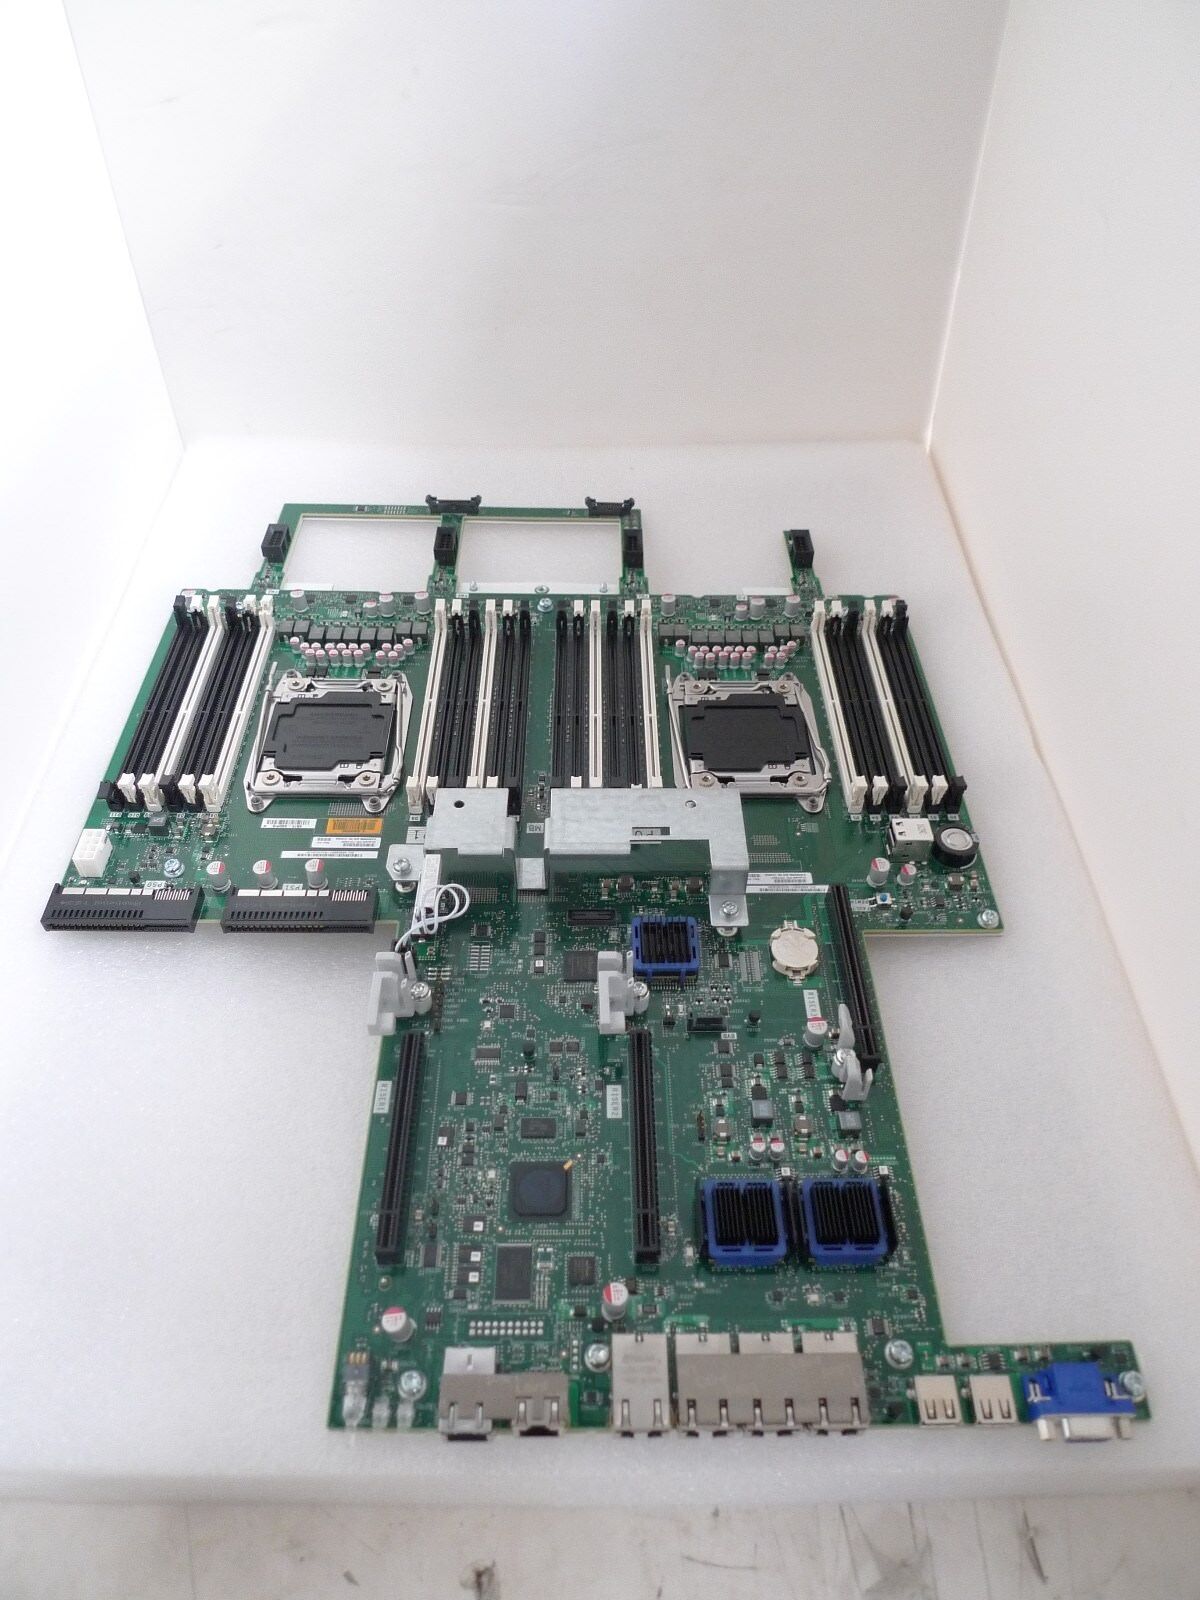 *SUN/ORACLE 7317947, SYSTEM BOARD ASSEMBLY